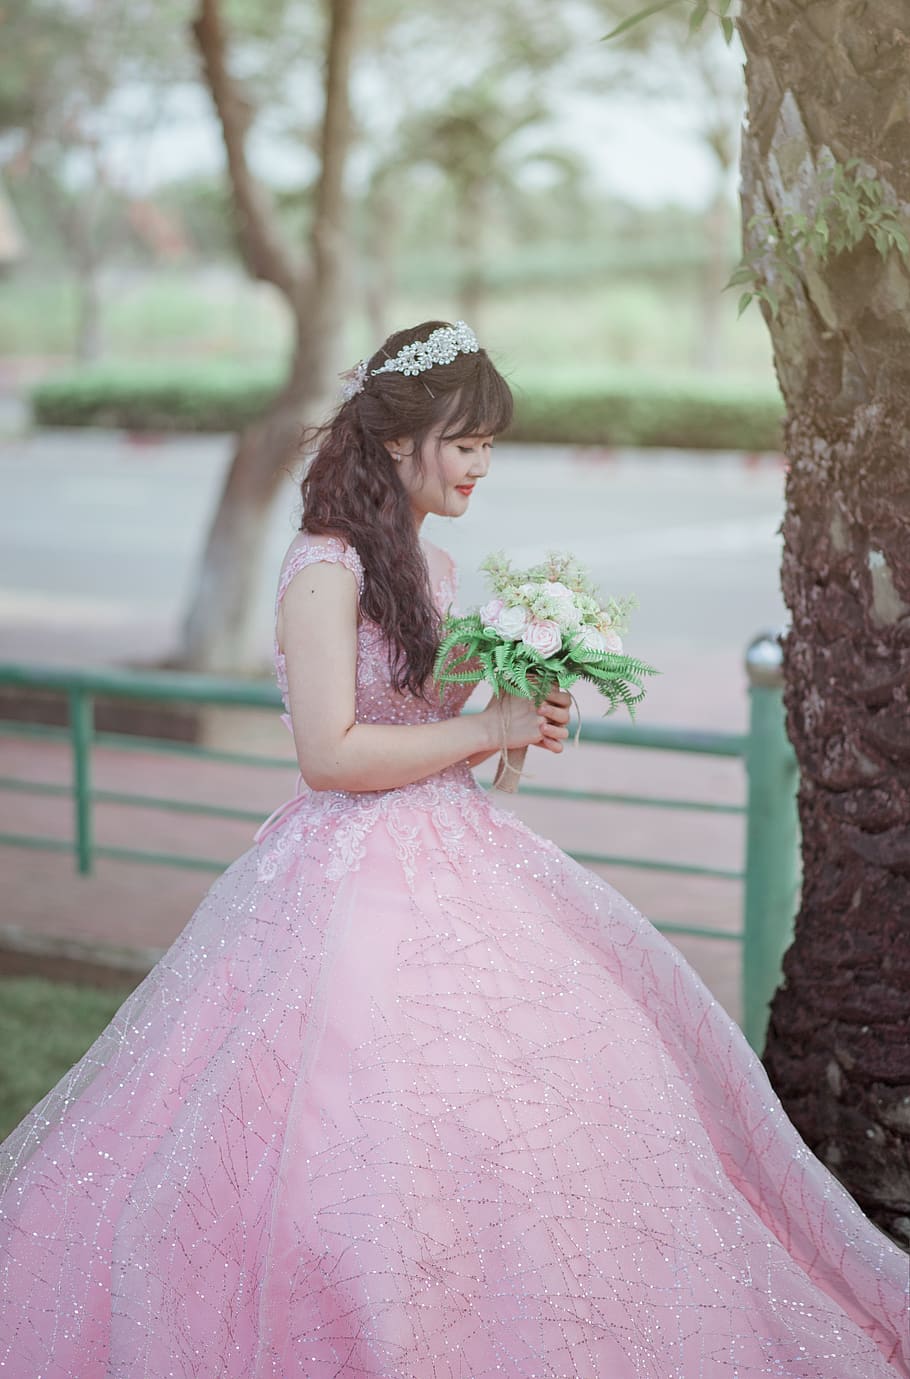 Woman in Pink Sleeveless Gown, adult, beautiful, bouquet, bridal